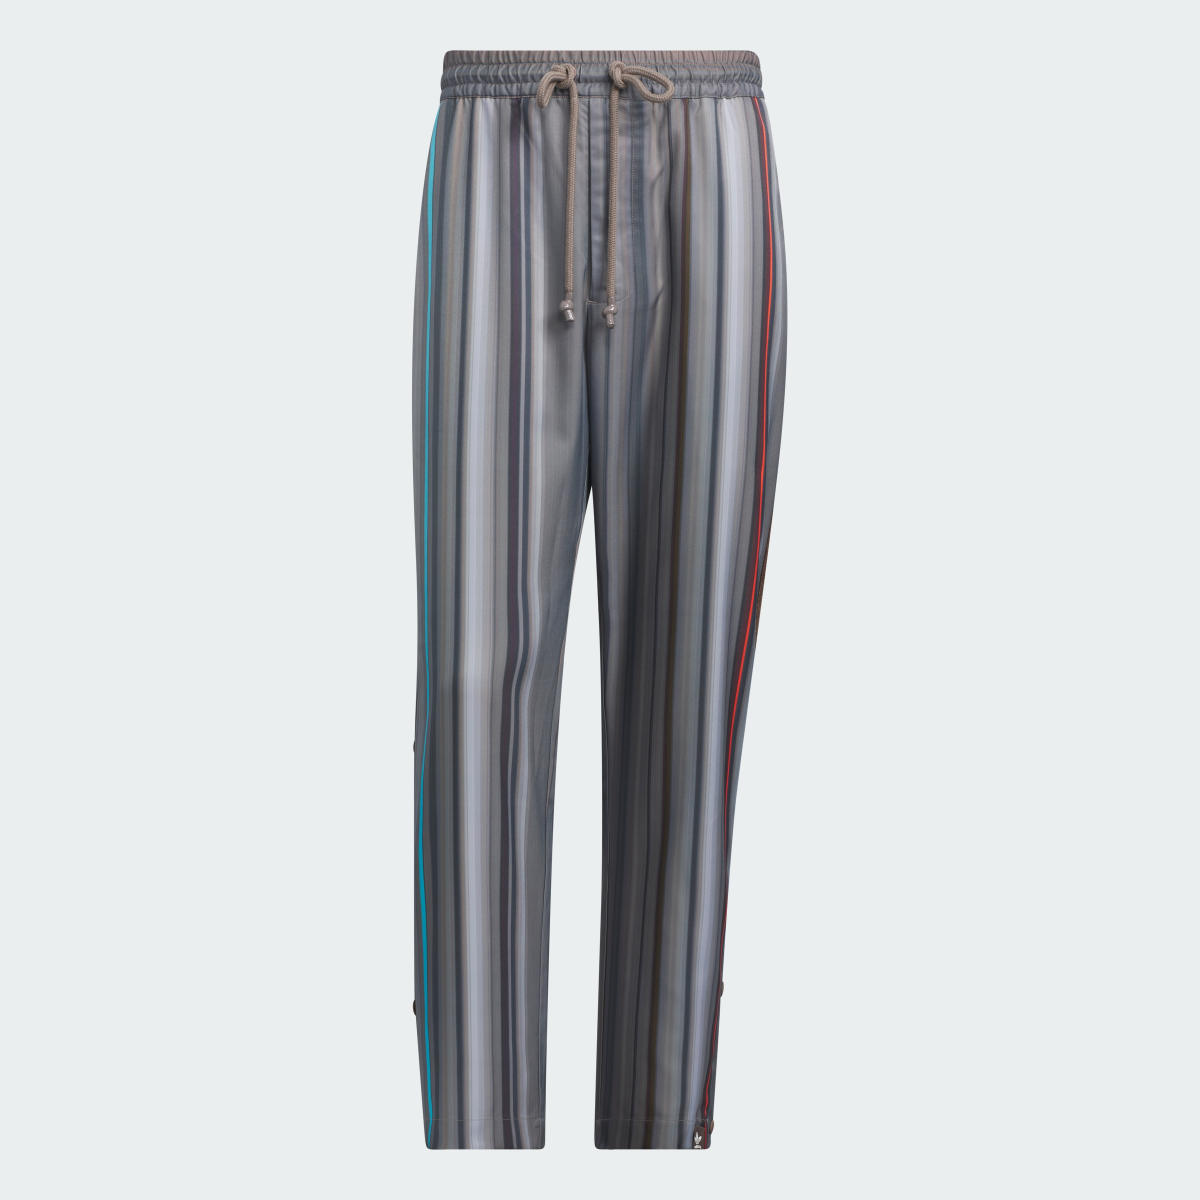 Adidas Song for the Mute Allover Print Trousers (Gender Neutral). 4